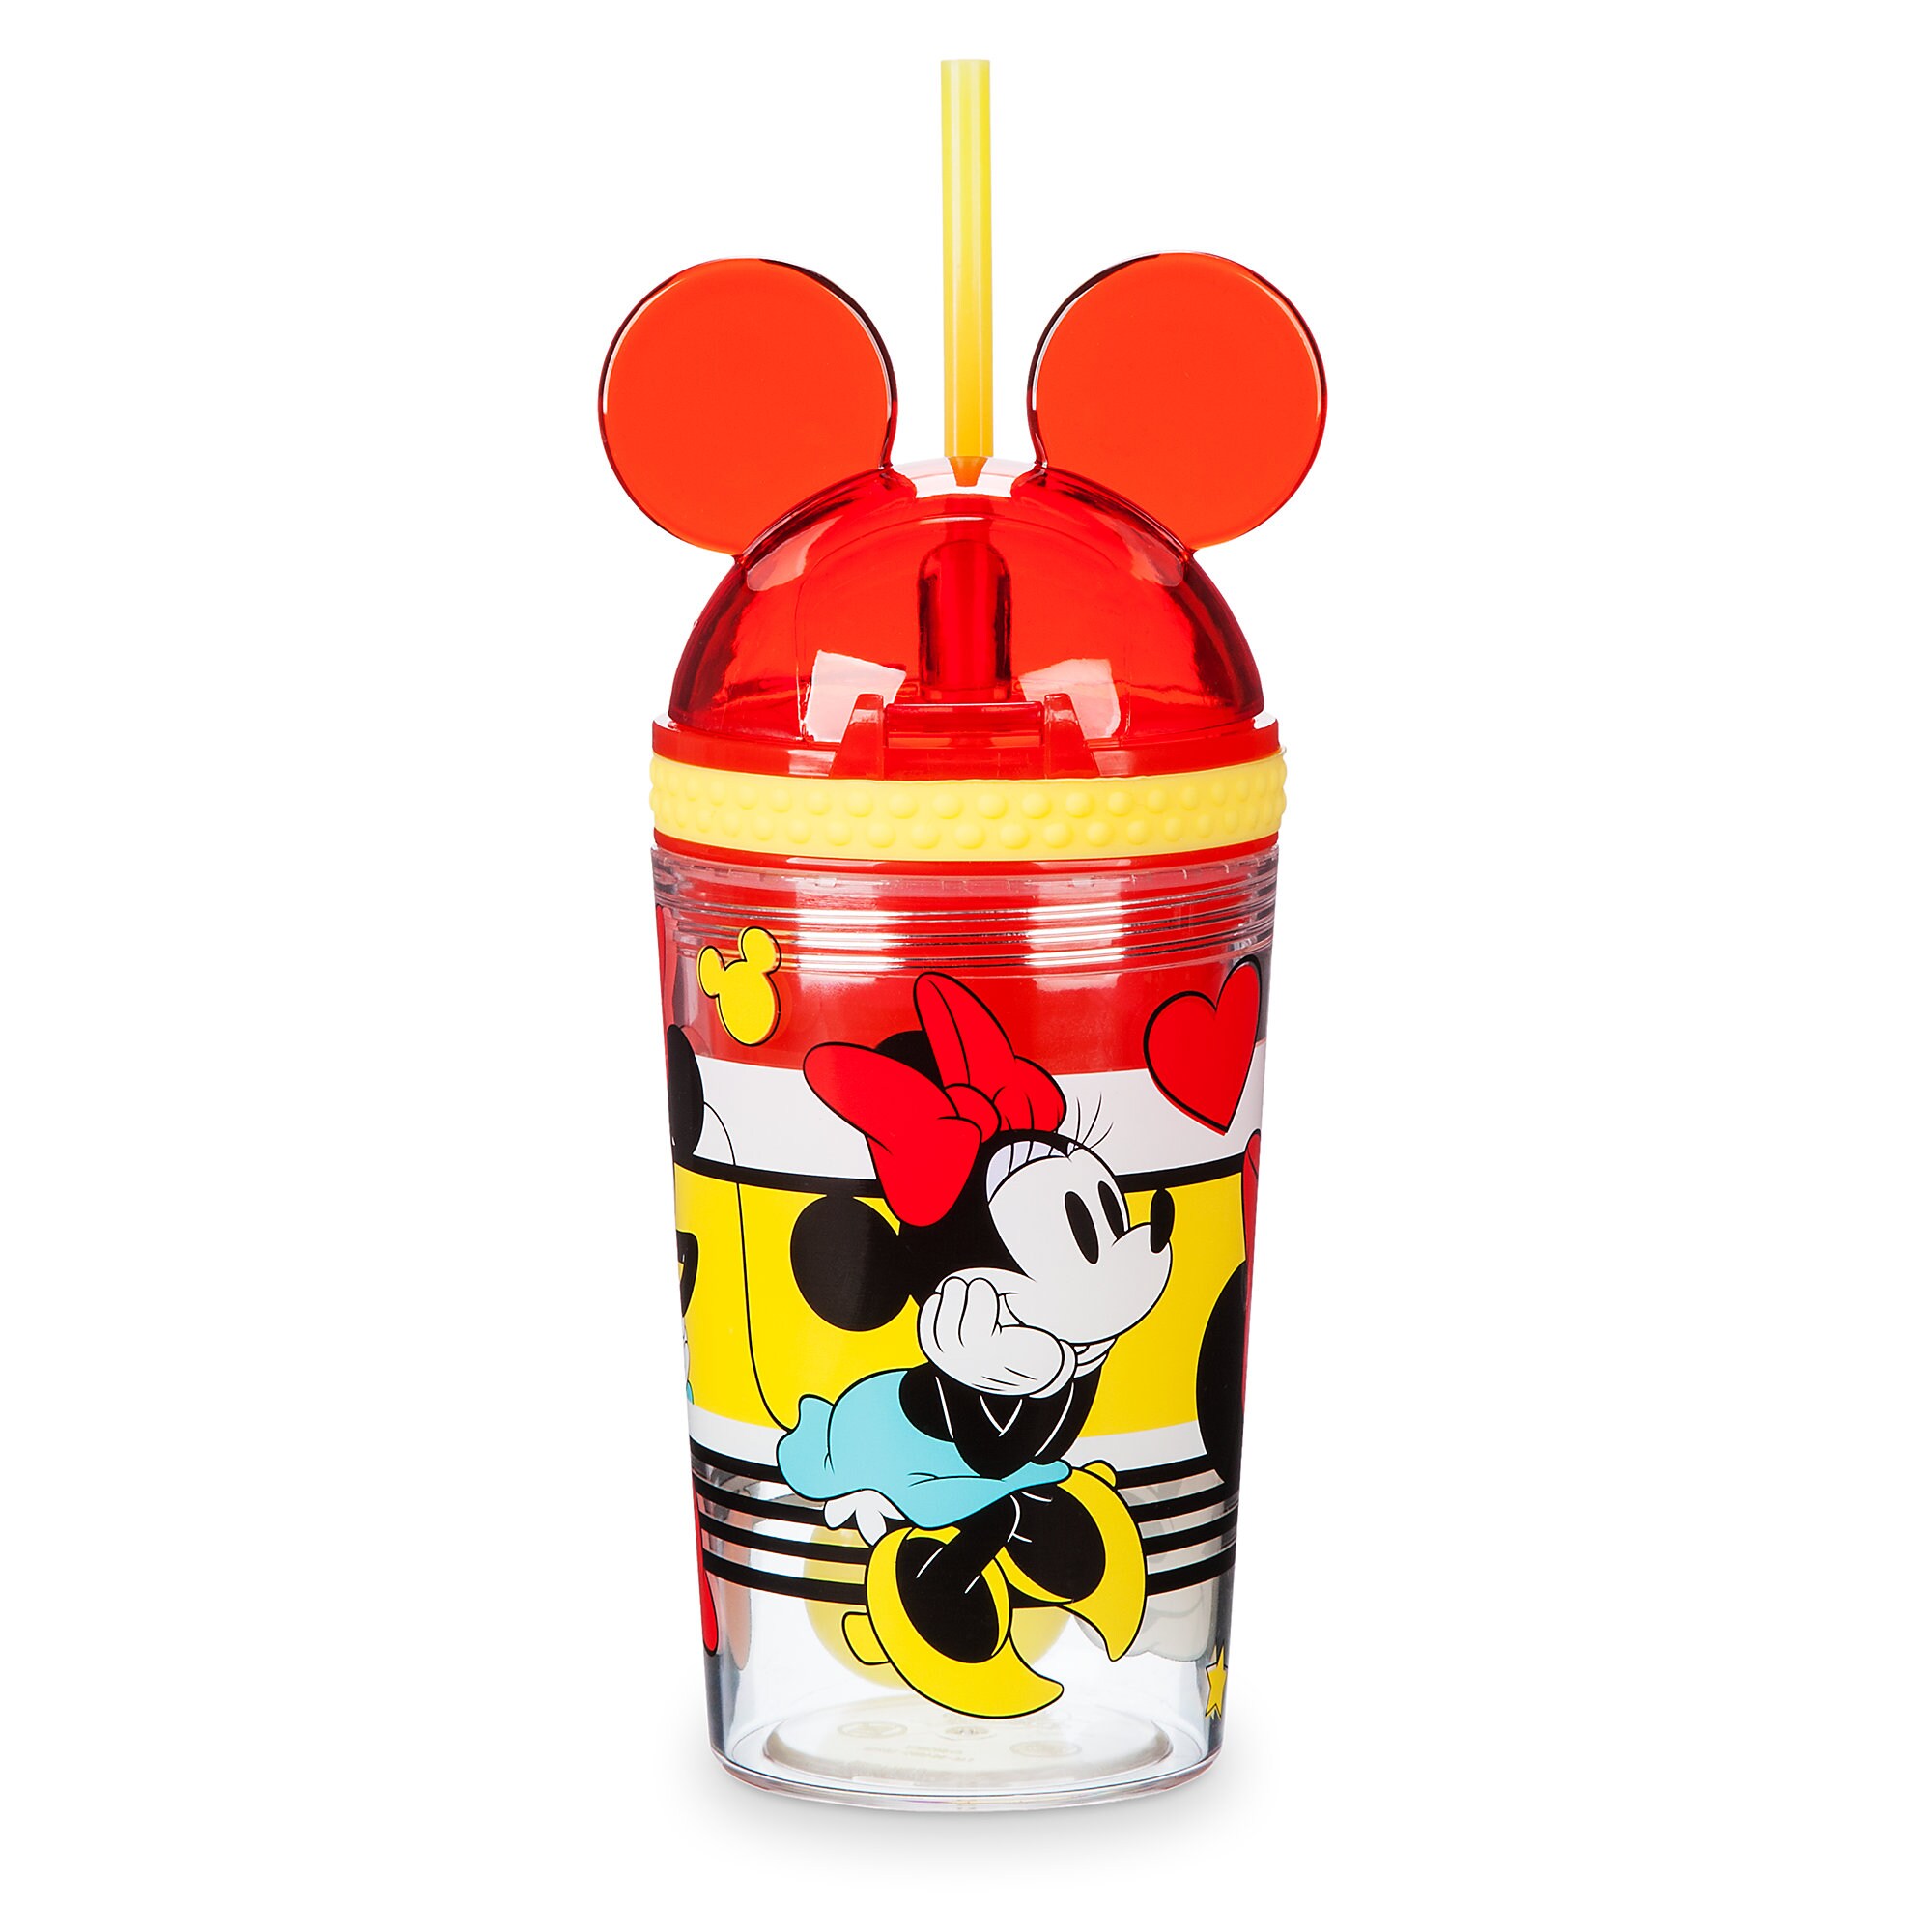 Minnie Mouse Tumbler with Snack Cup and Straw - Disney Eats